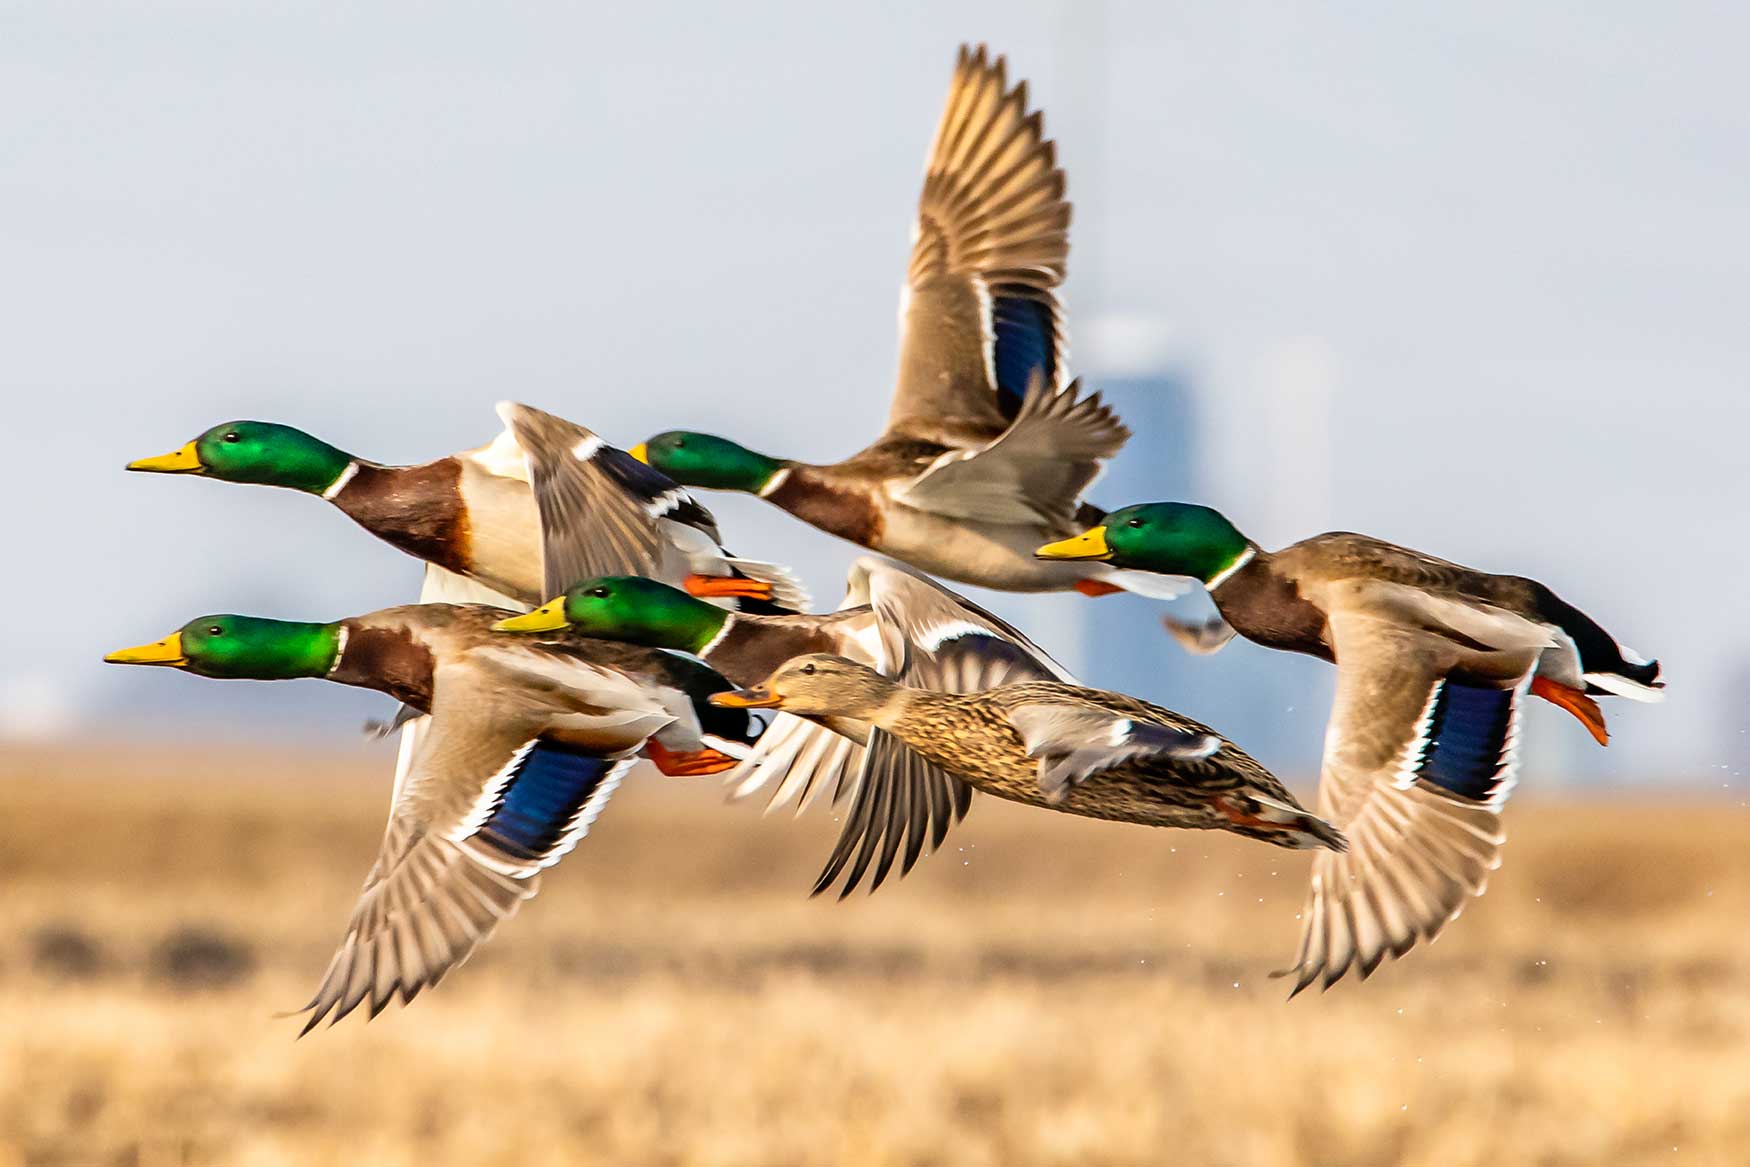 Ducks Unlimited Television